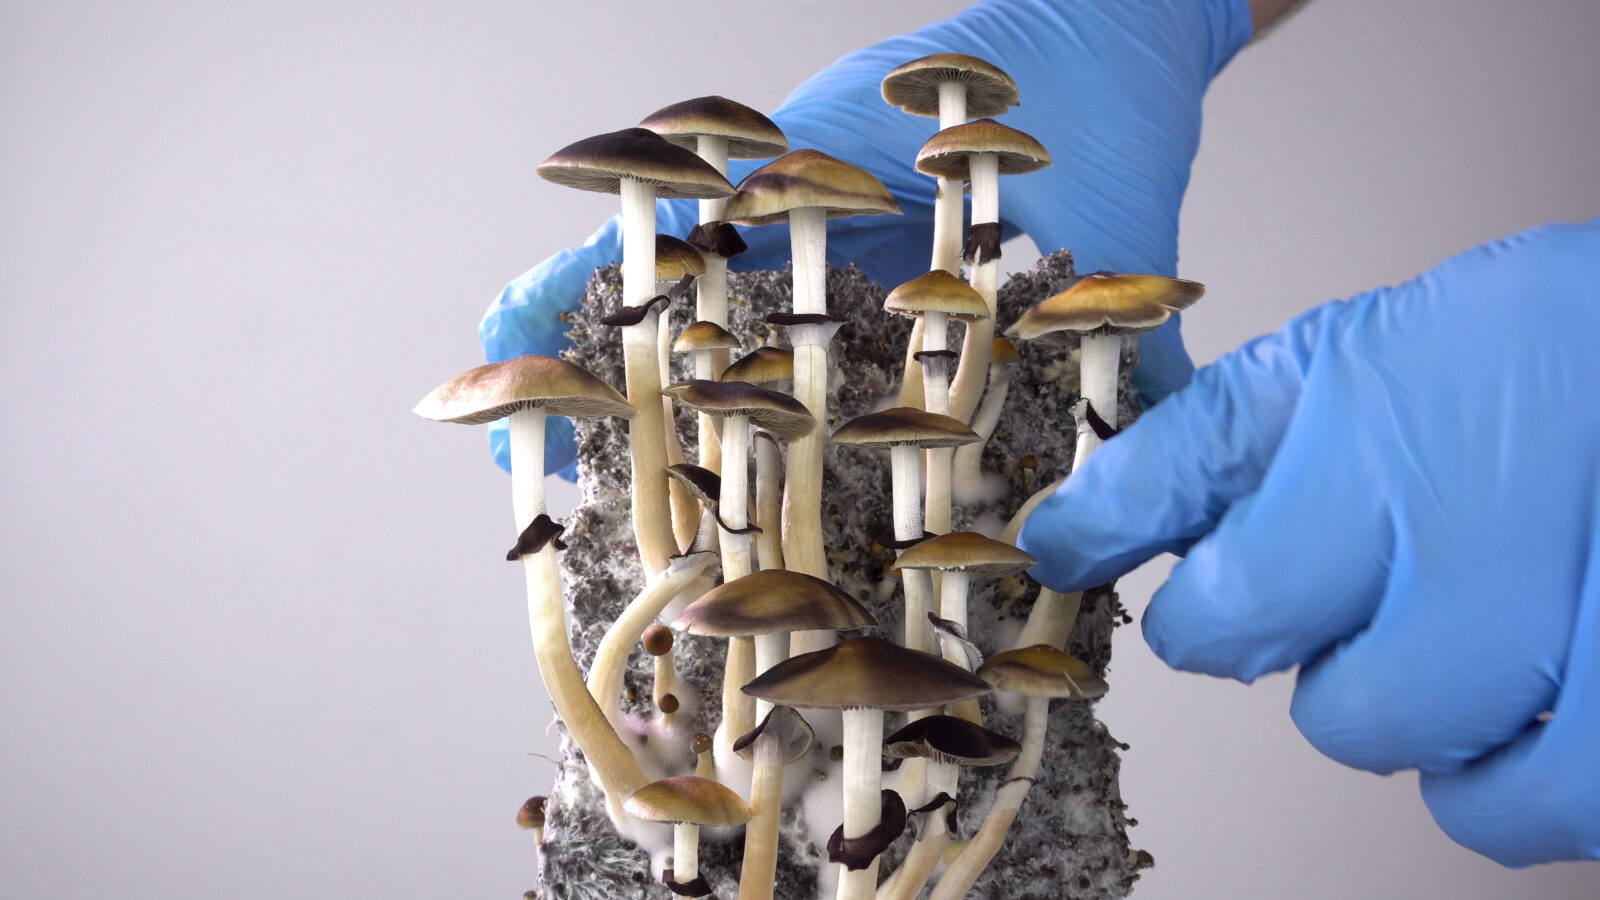 Arizona Bill Would Legalize Psilocybin Service Centers, Add to Current Research Efforts